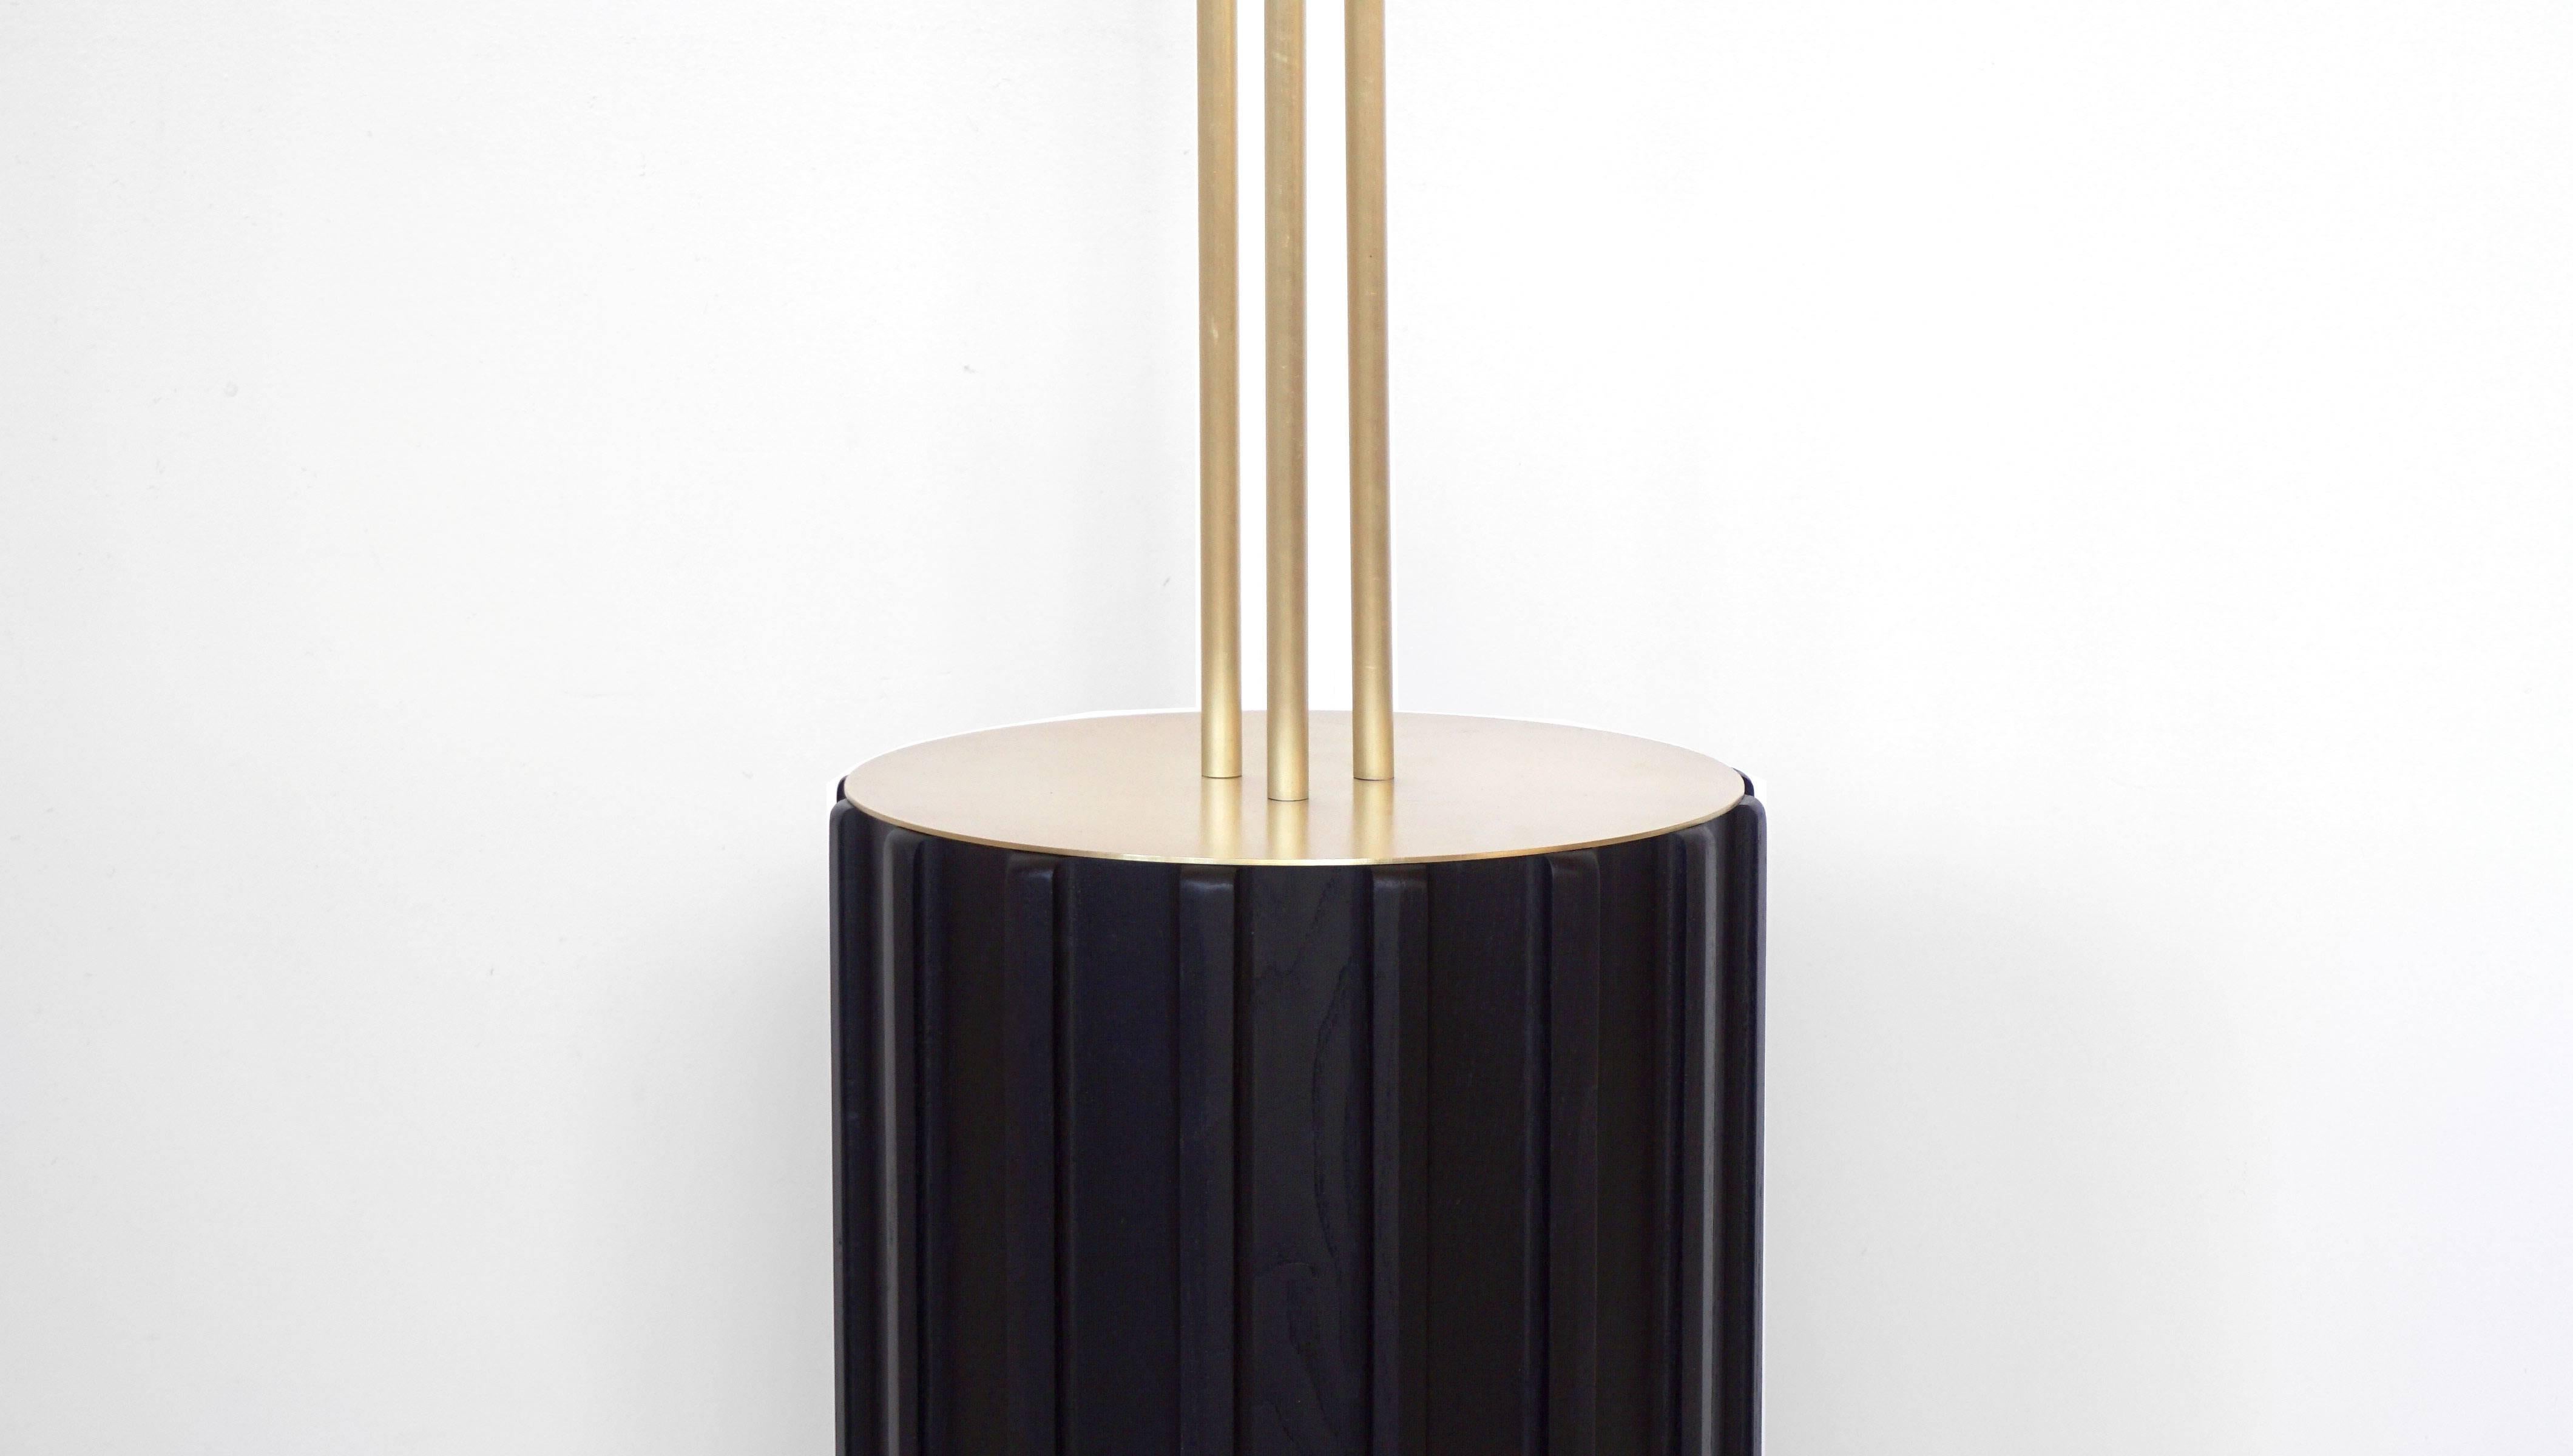 Trillium floor lamp is made of brass and blackened ashwood. Three rings sit at eye level, each with a light source hidden within, between two brass discs. The light seeps out from the discs and is bounced off the interior of the rings, with a soft